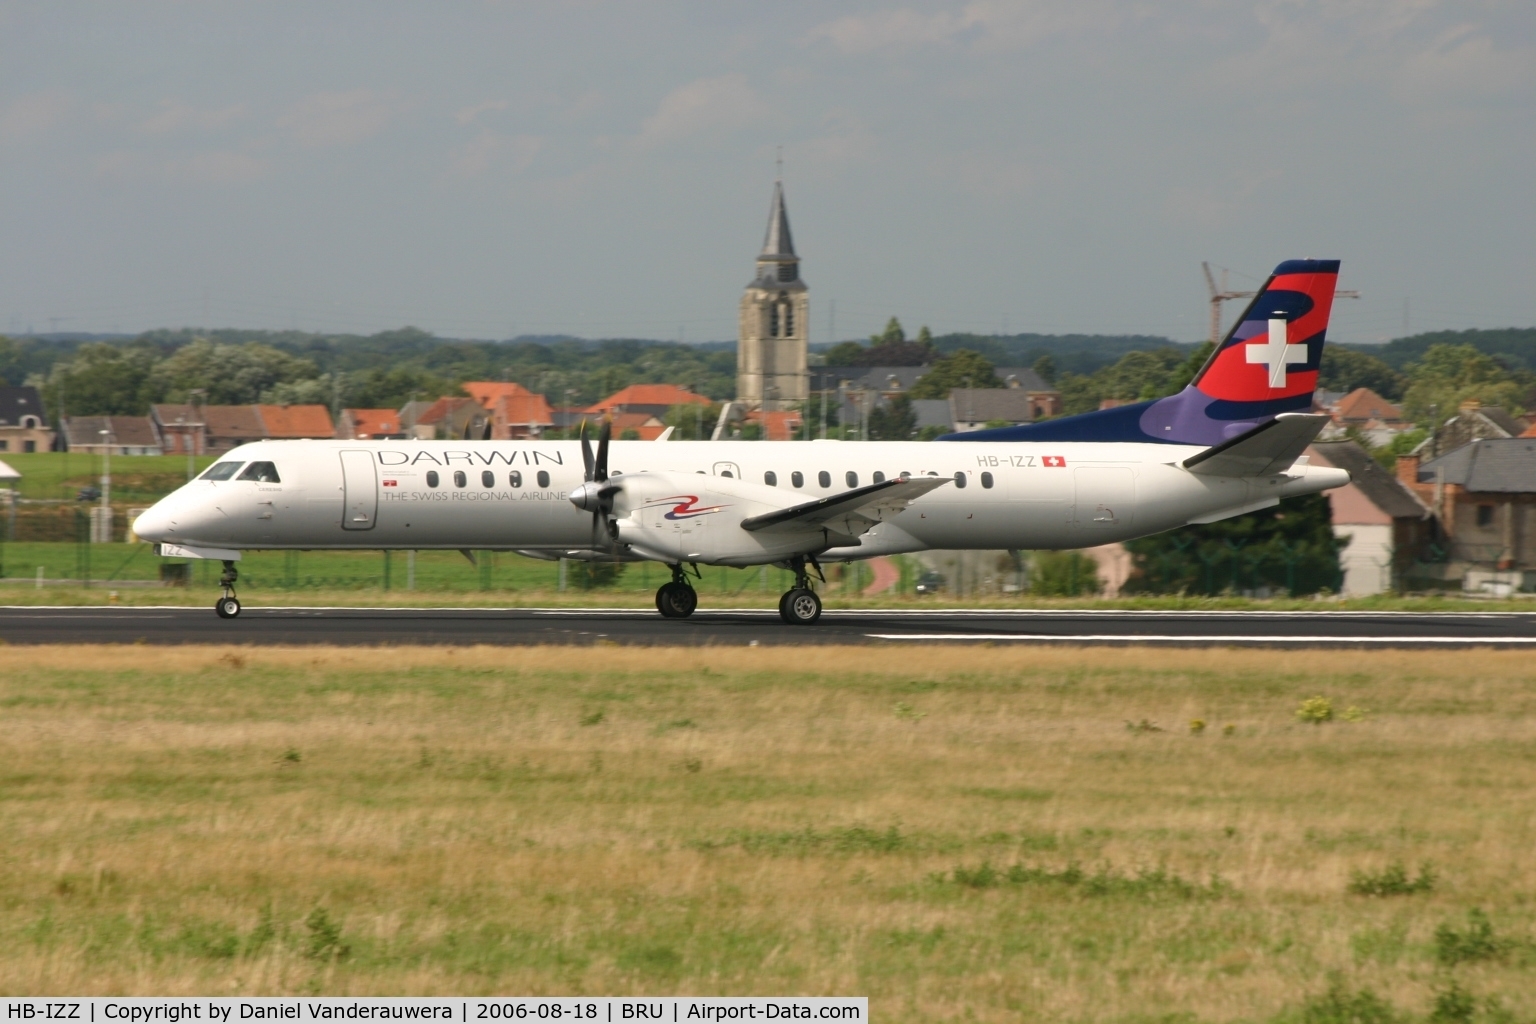 HB-IZZ, 1997 Saab 2000 C/N 2000-048, Now active to DARWIN The Swiss Regional Airline